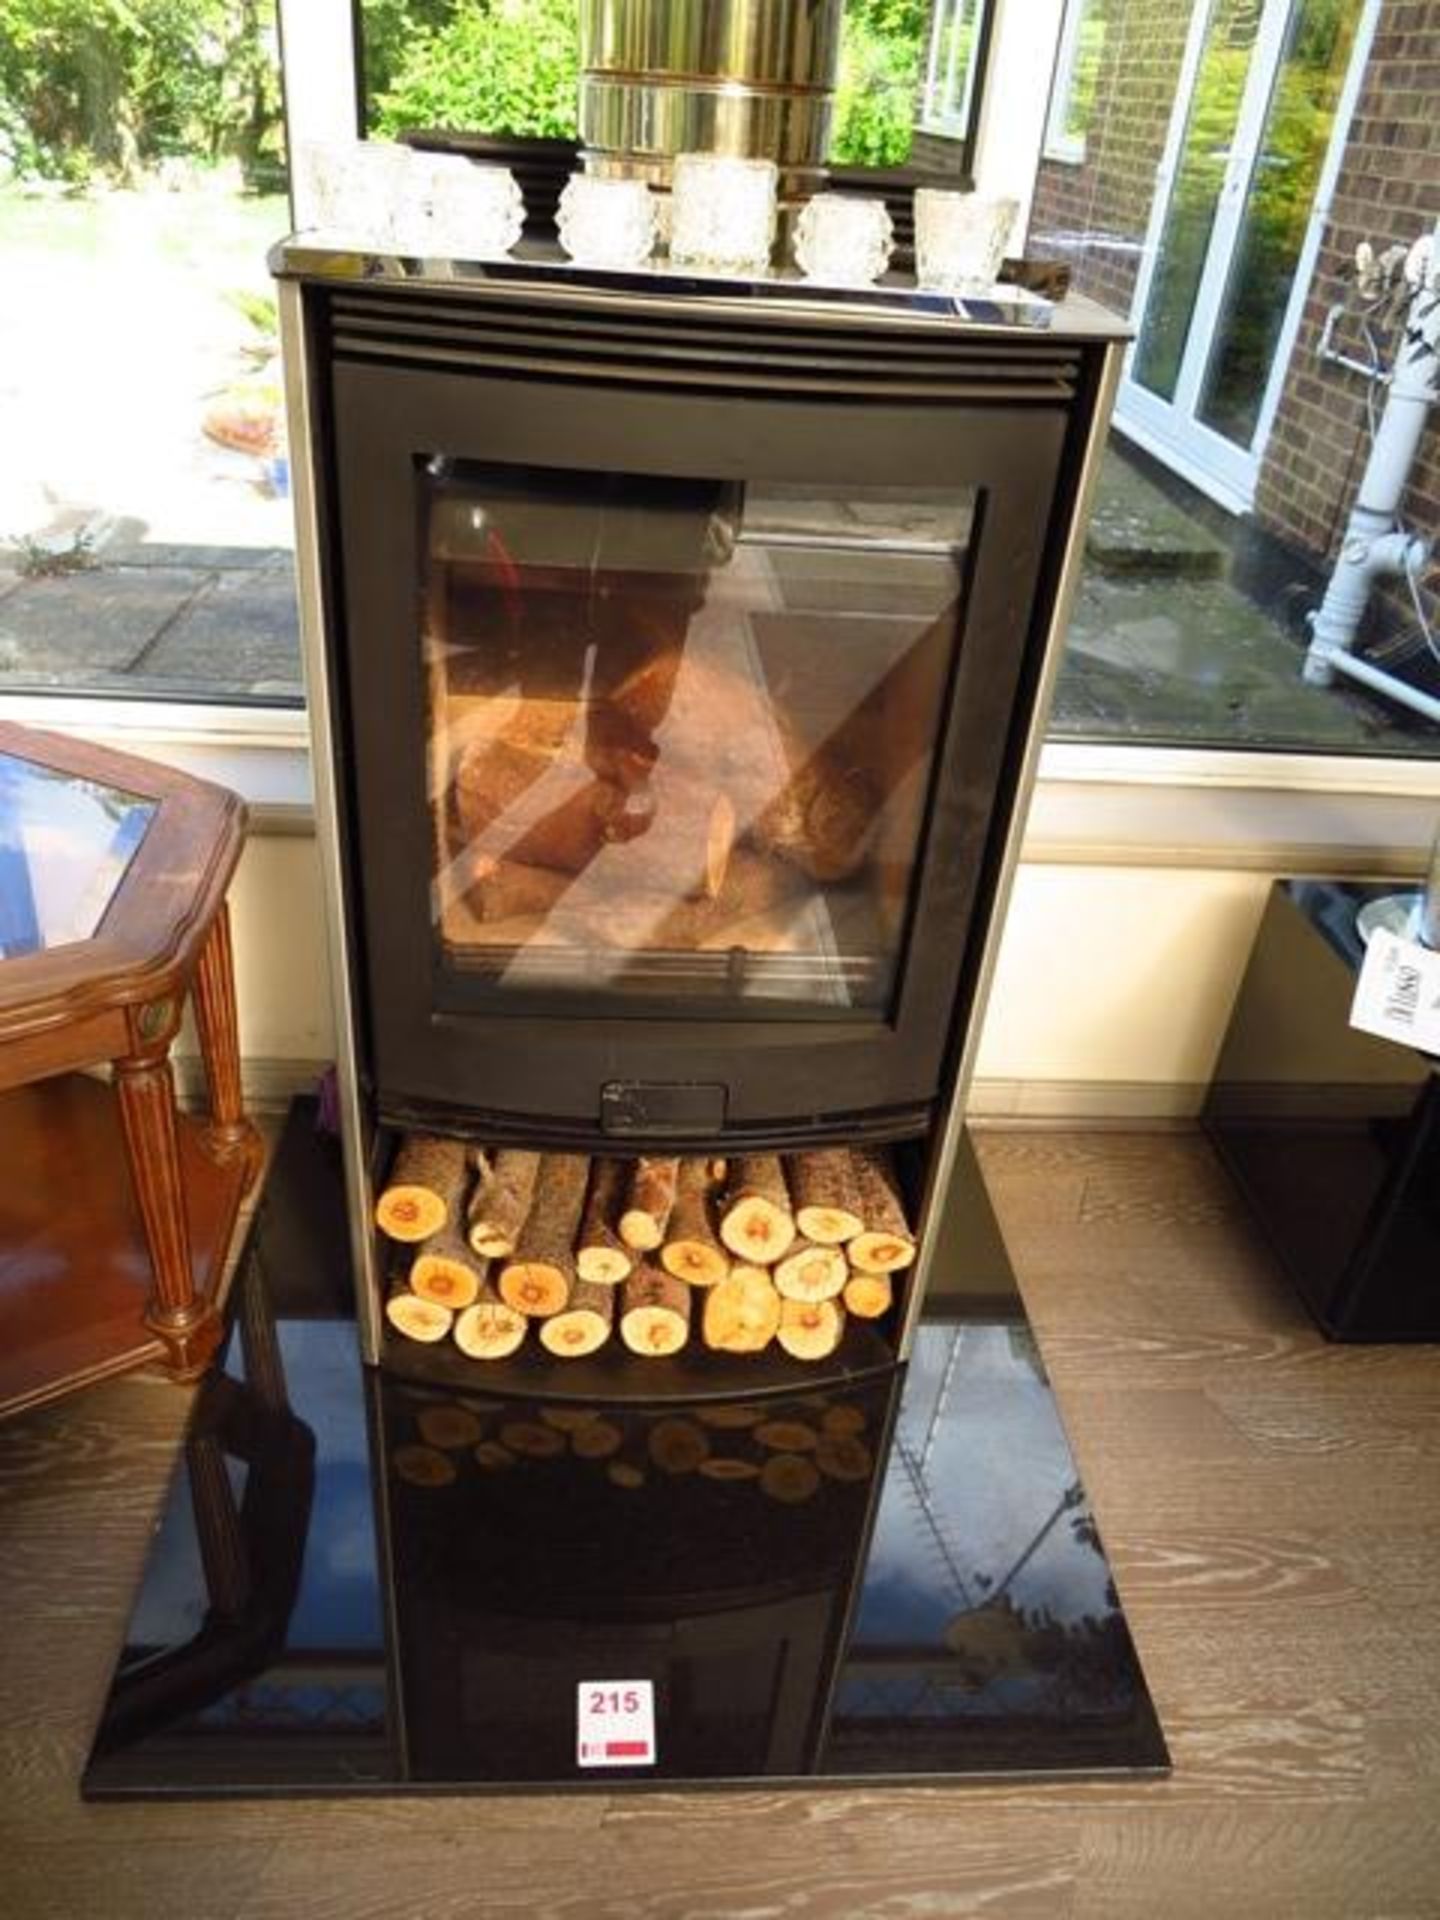 Dilusso R5 Euro BSEN 13240 Wood Burning Stove Efficiency 79% Nominal Heat Output 4.9Kw Mean CO - Image 5 of 5